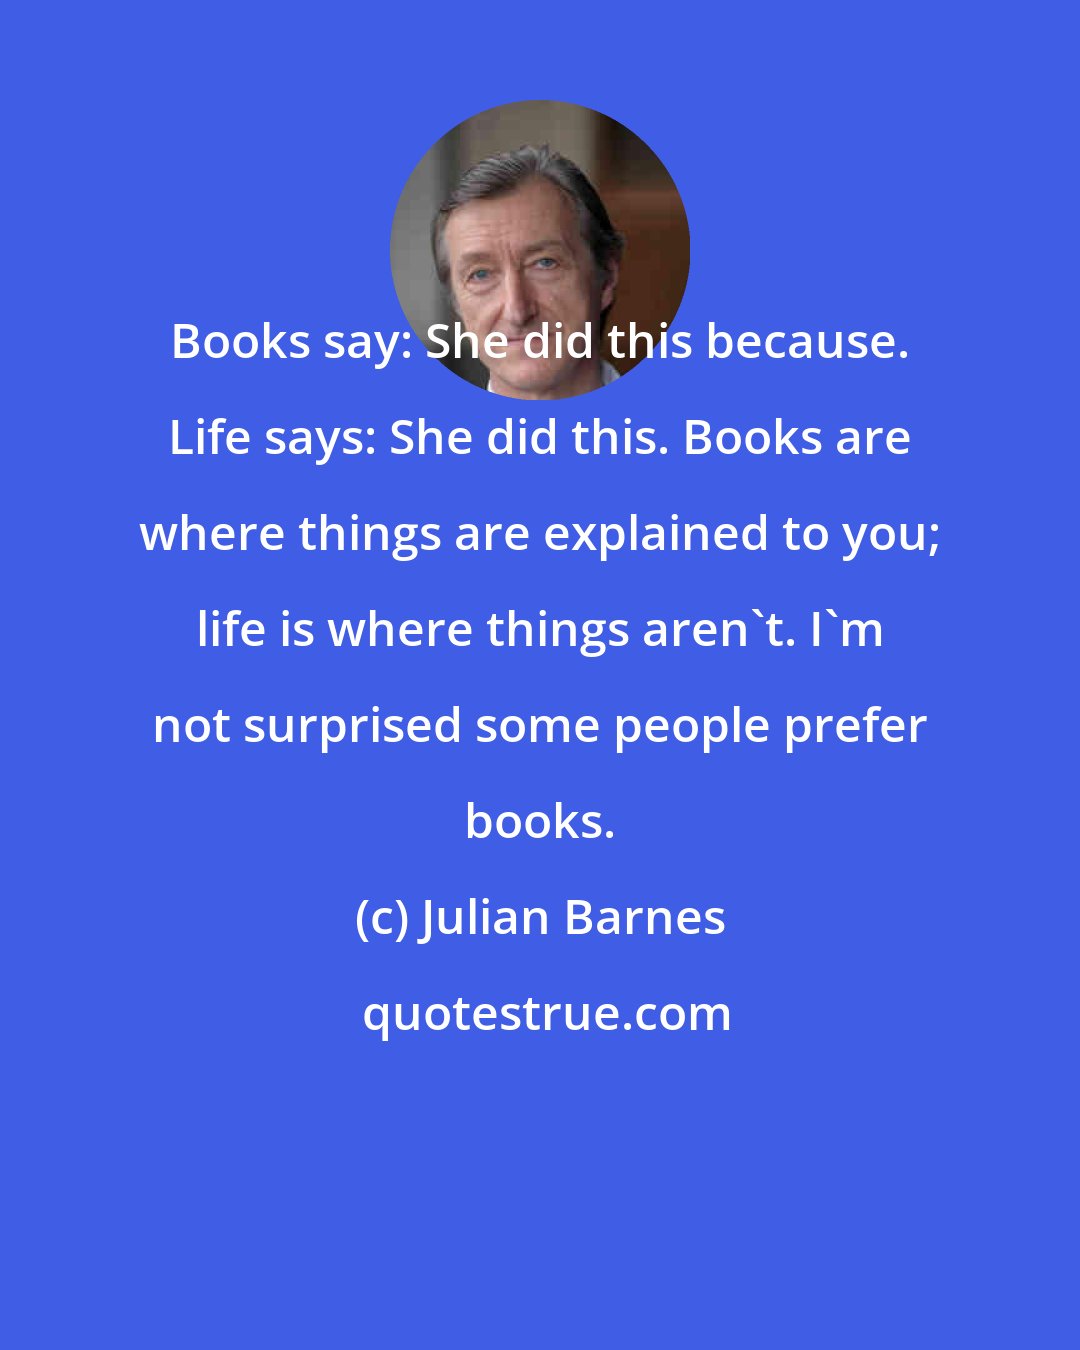 Julian Barnes: Books say: She did this because. Life says: She did this. Books are where things are explained to you; life is where things aren't. I'm not surprised some people prefer books.